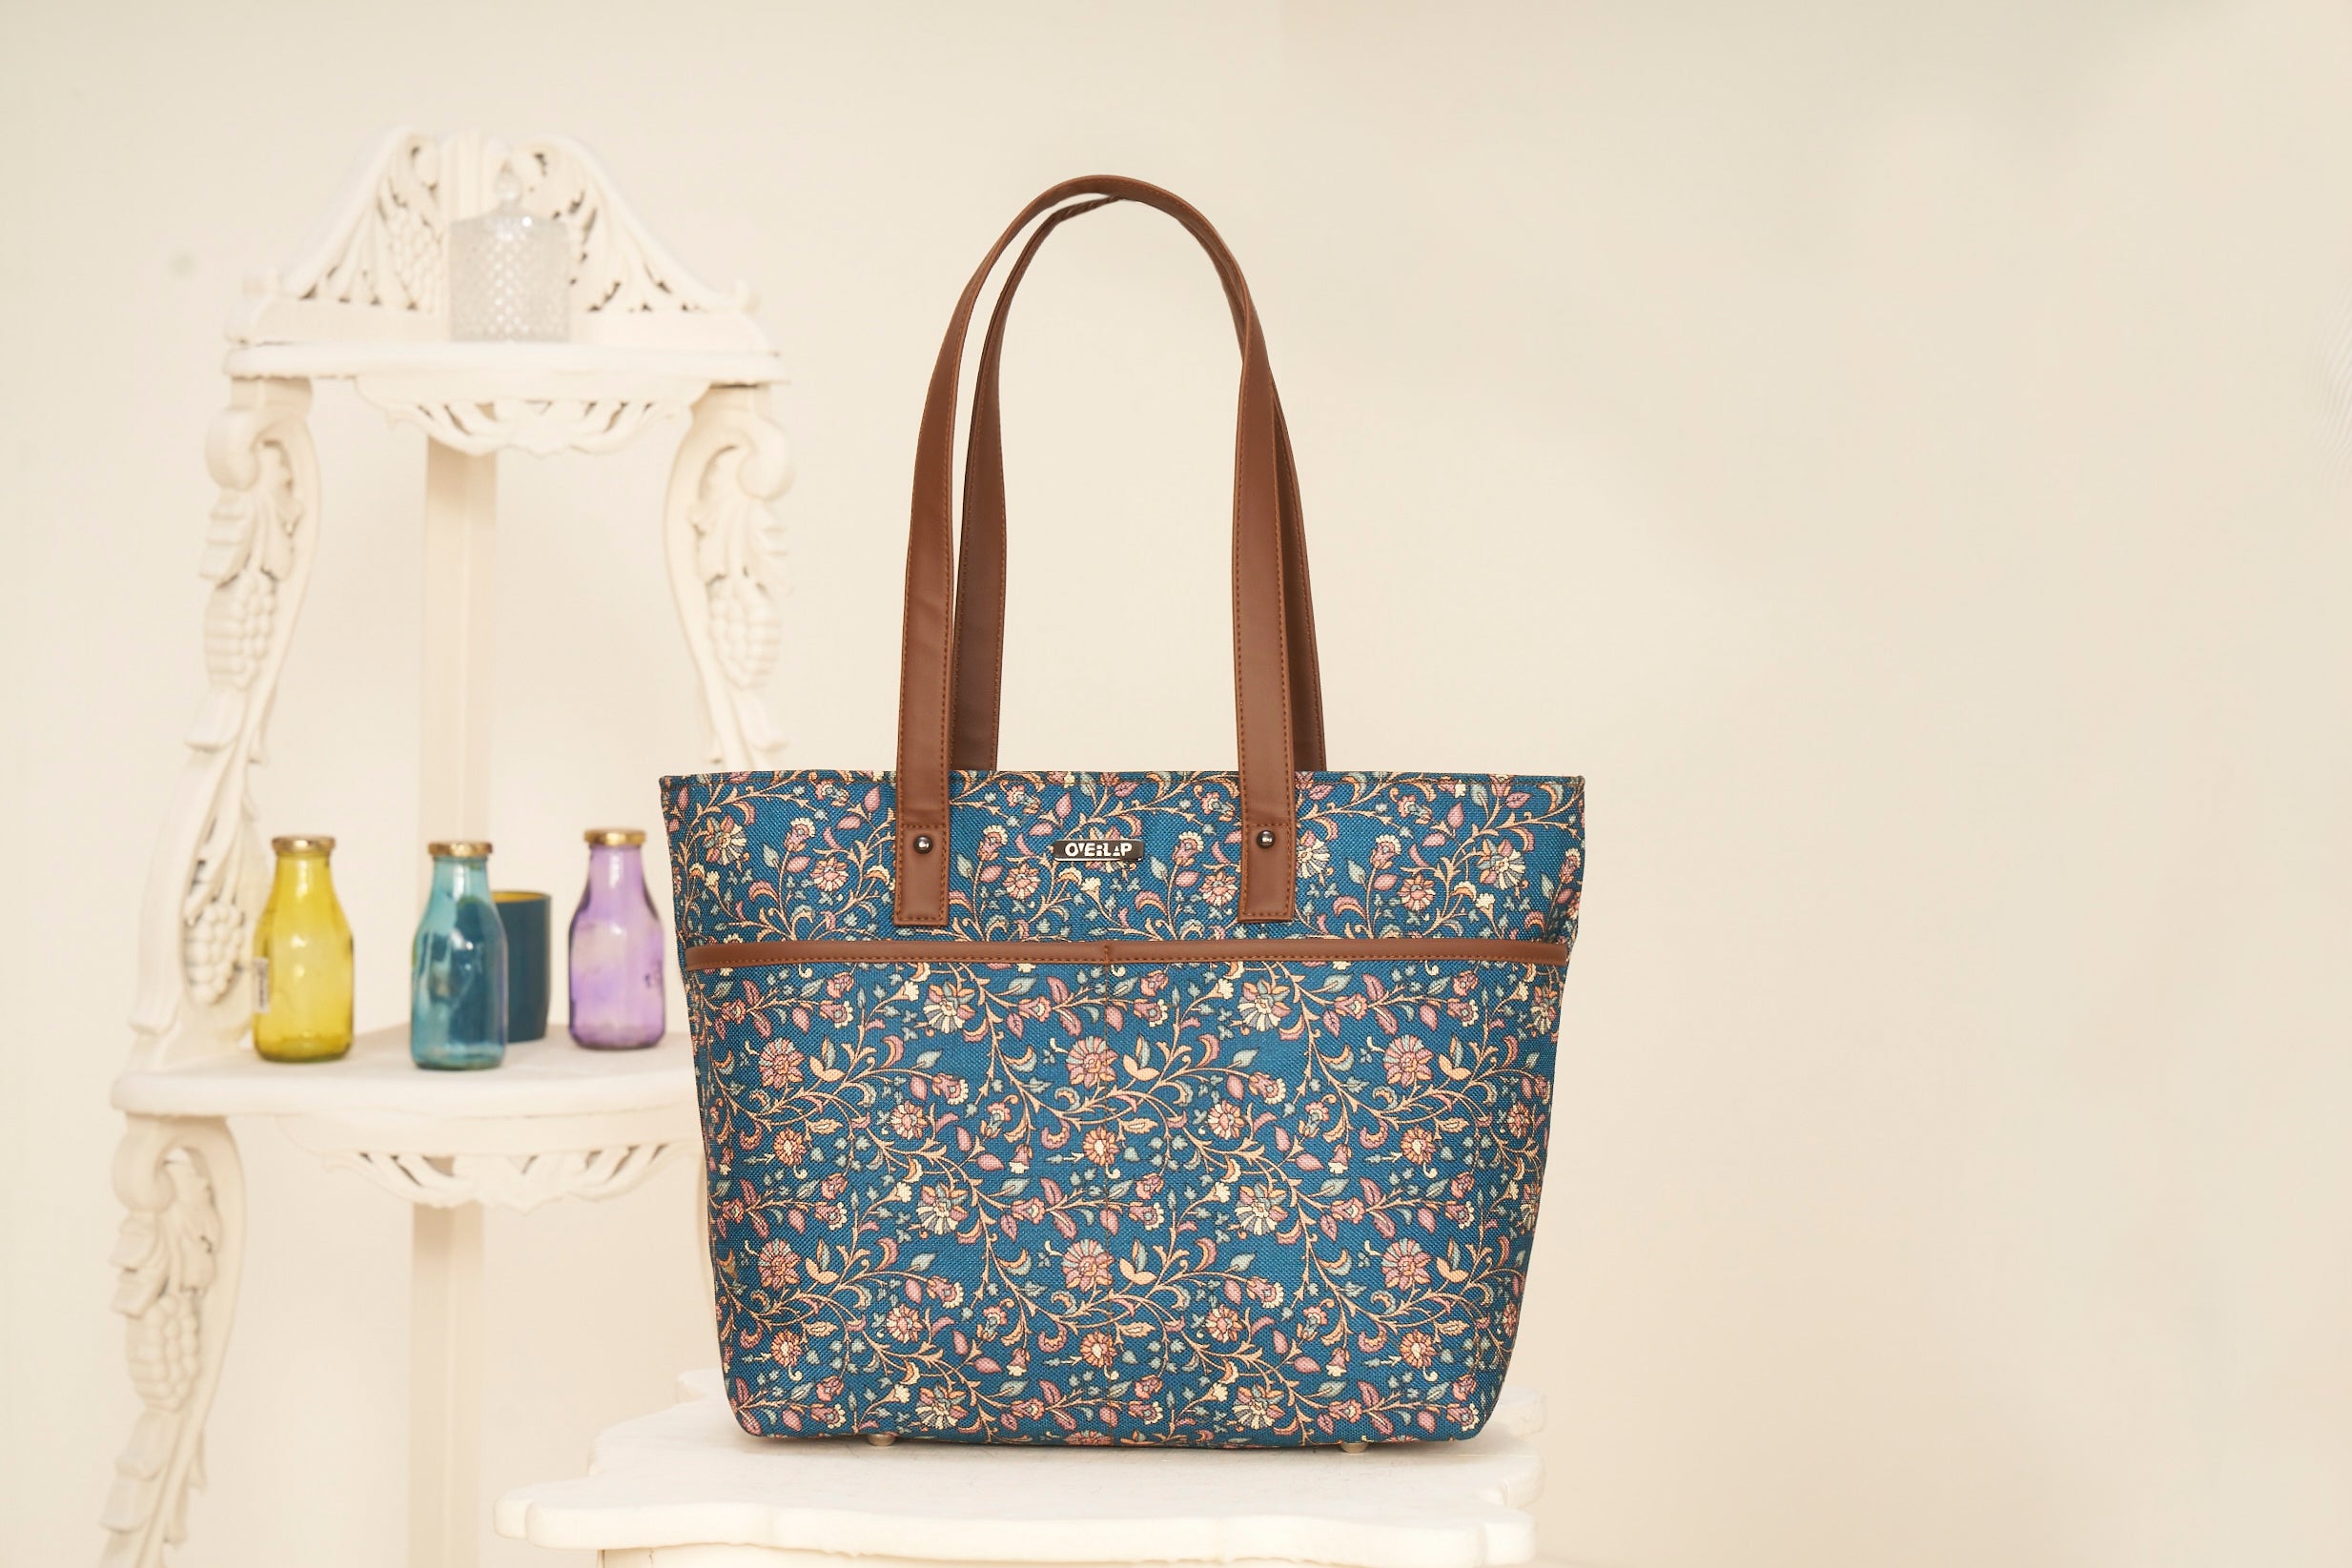 Citron 006: Colorful Carryall - Expressive Canvas Tote for All Occasions